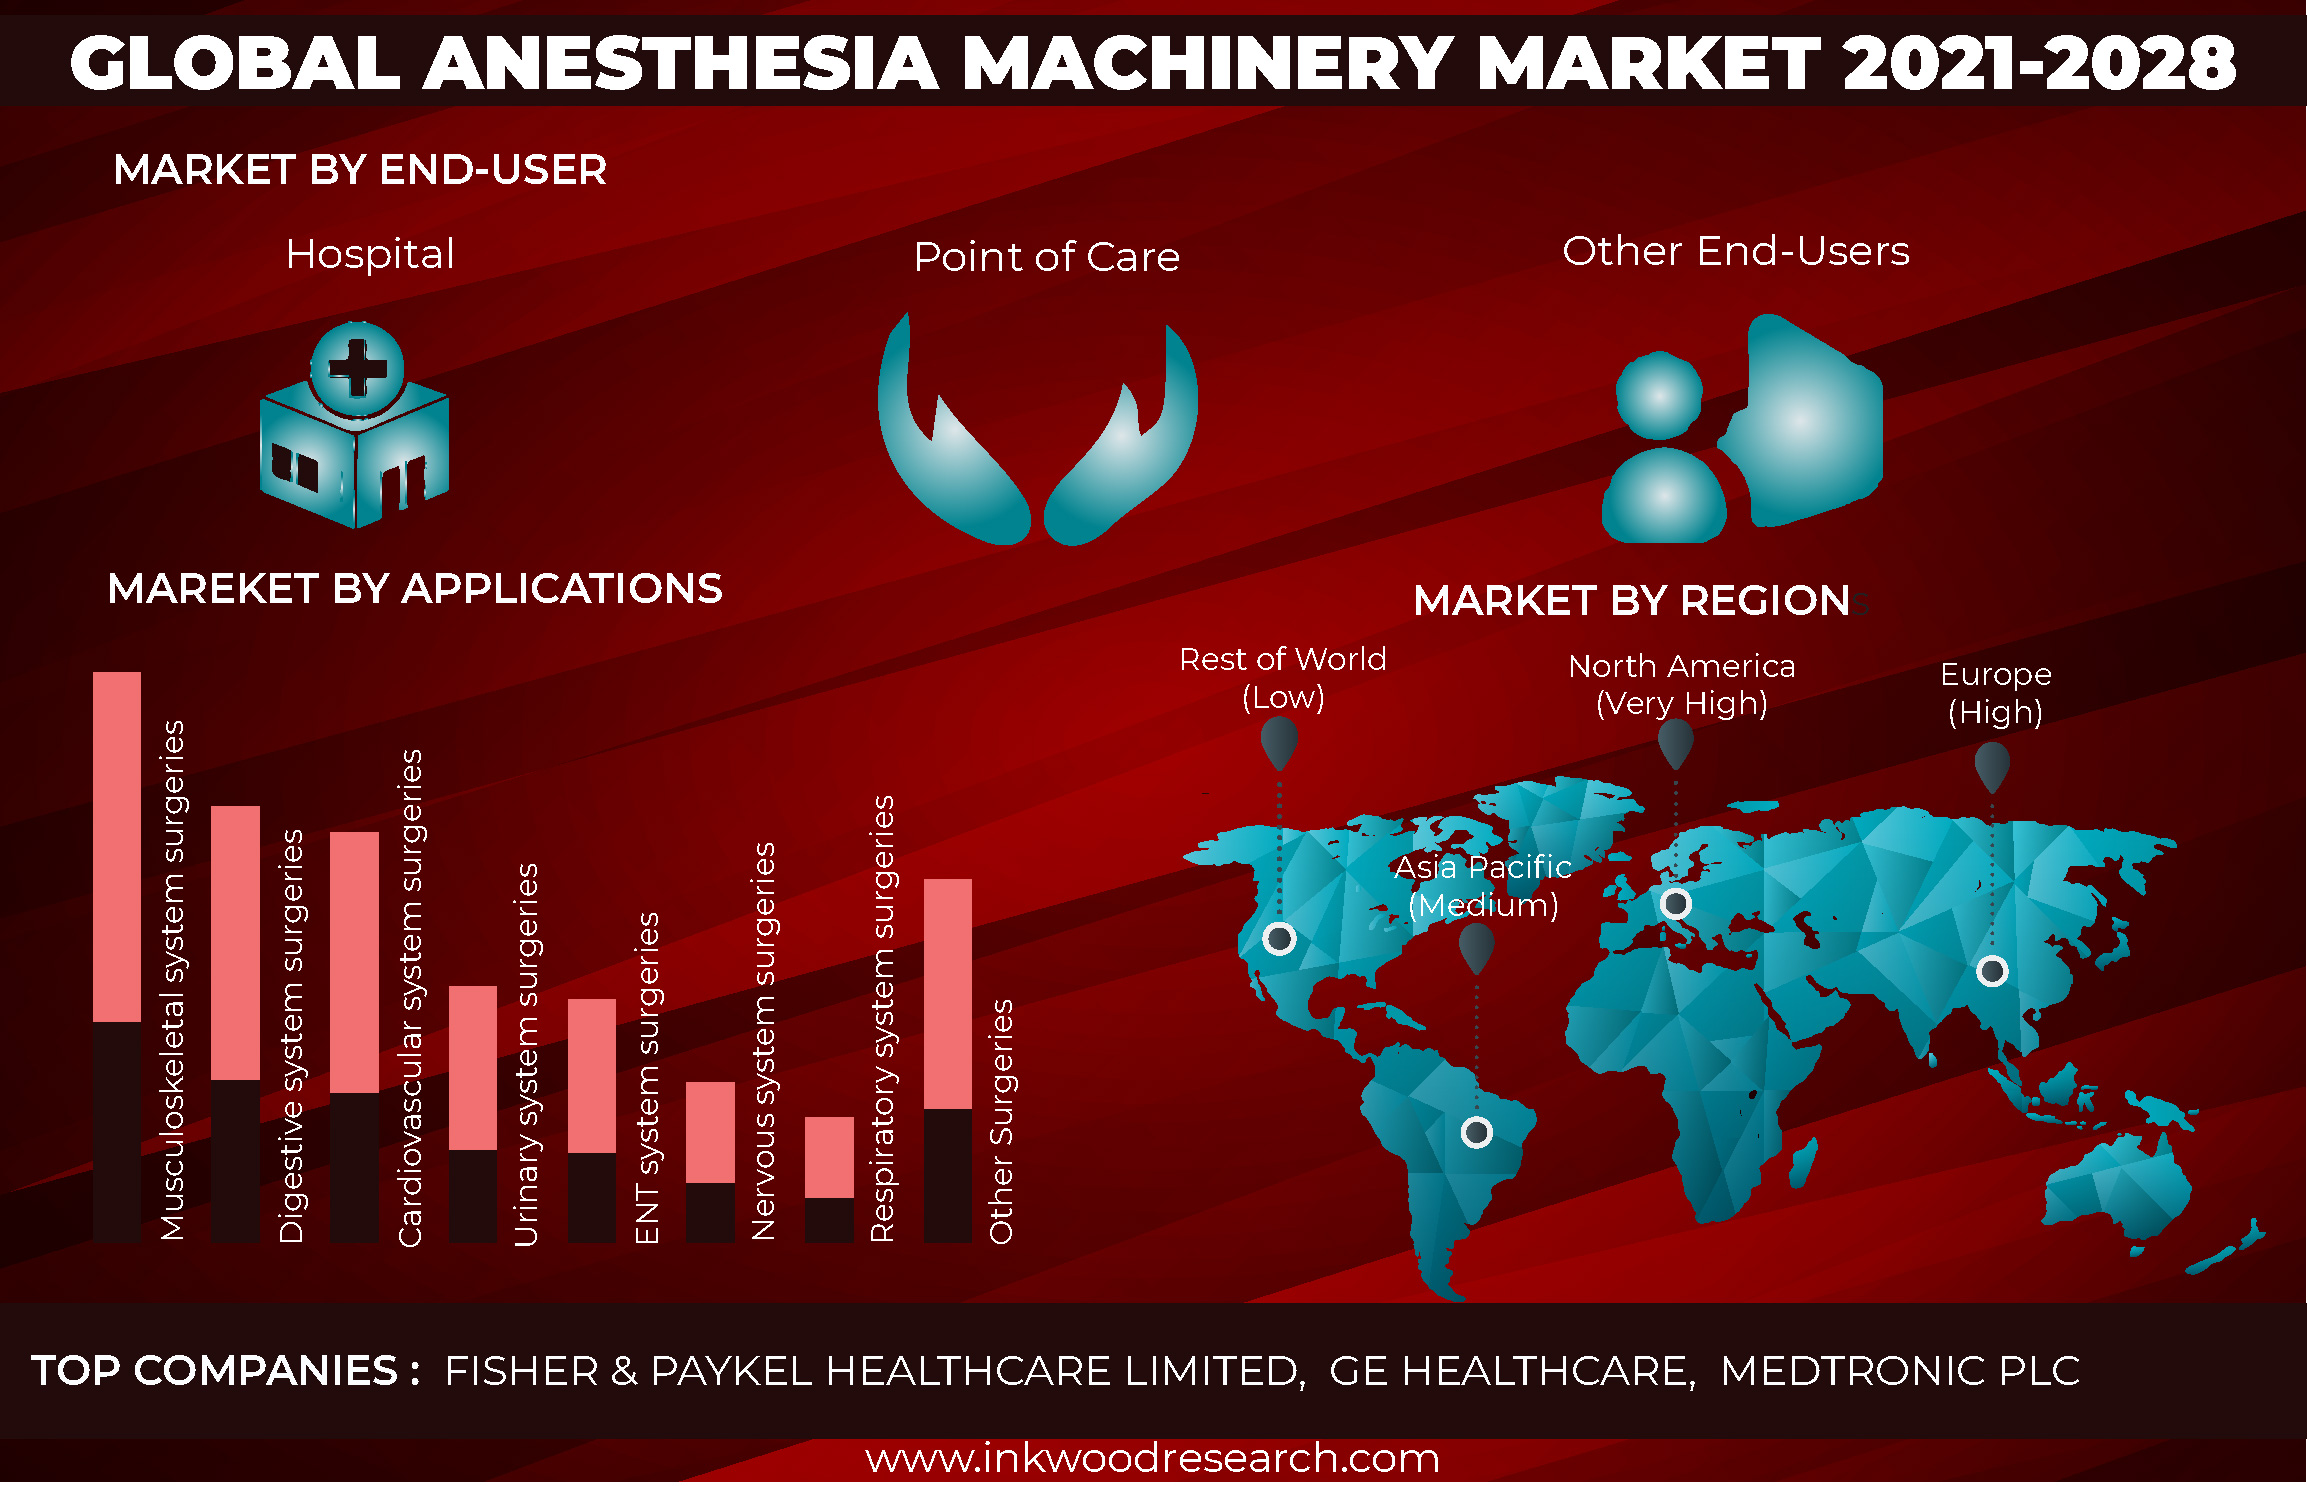 Rise in Surgical Cases to boost the Global Anesthesia Machinery Market